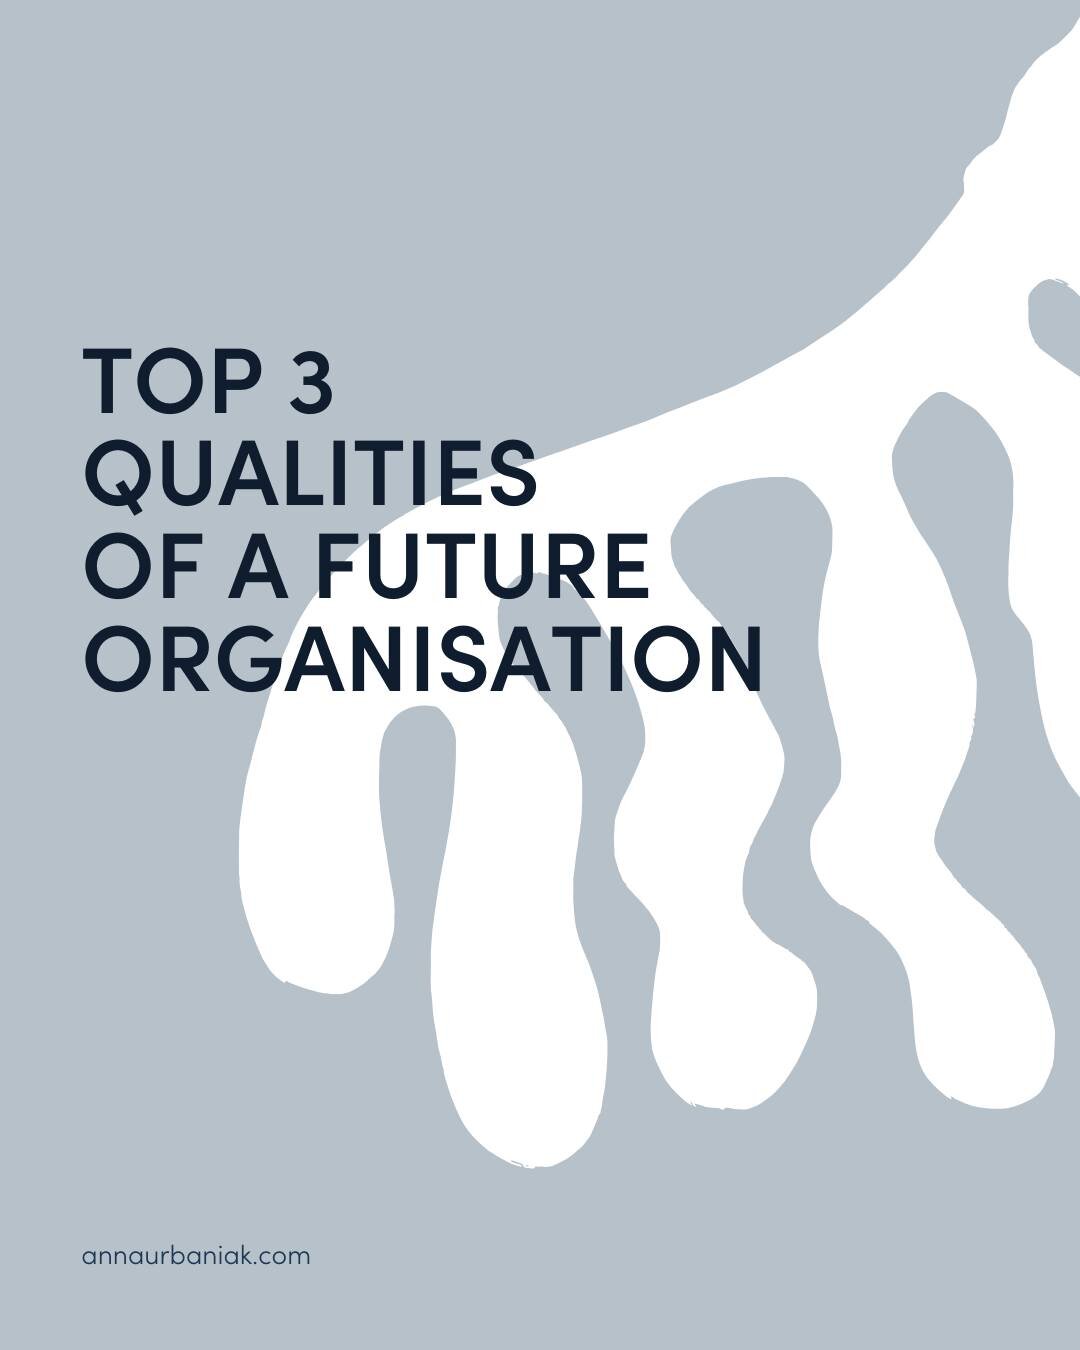 What would you do if you had a say in shaping the kind of organisation you want to work in?

If I had a magic wand to design an organisation of the future, here are my TOP 3 characteristics:

1️⃣ a place where as an employee I can truly be who I am, 